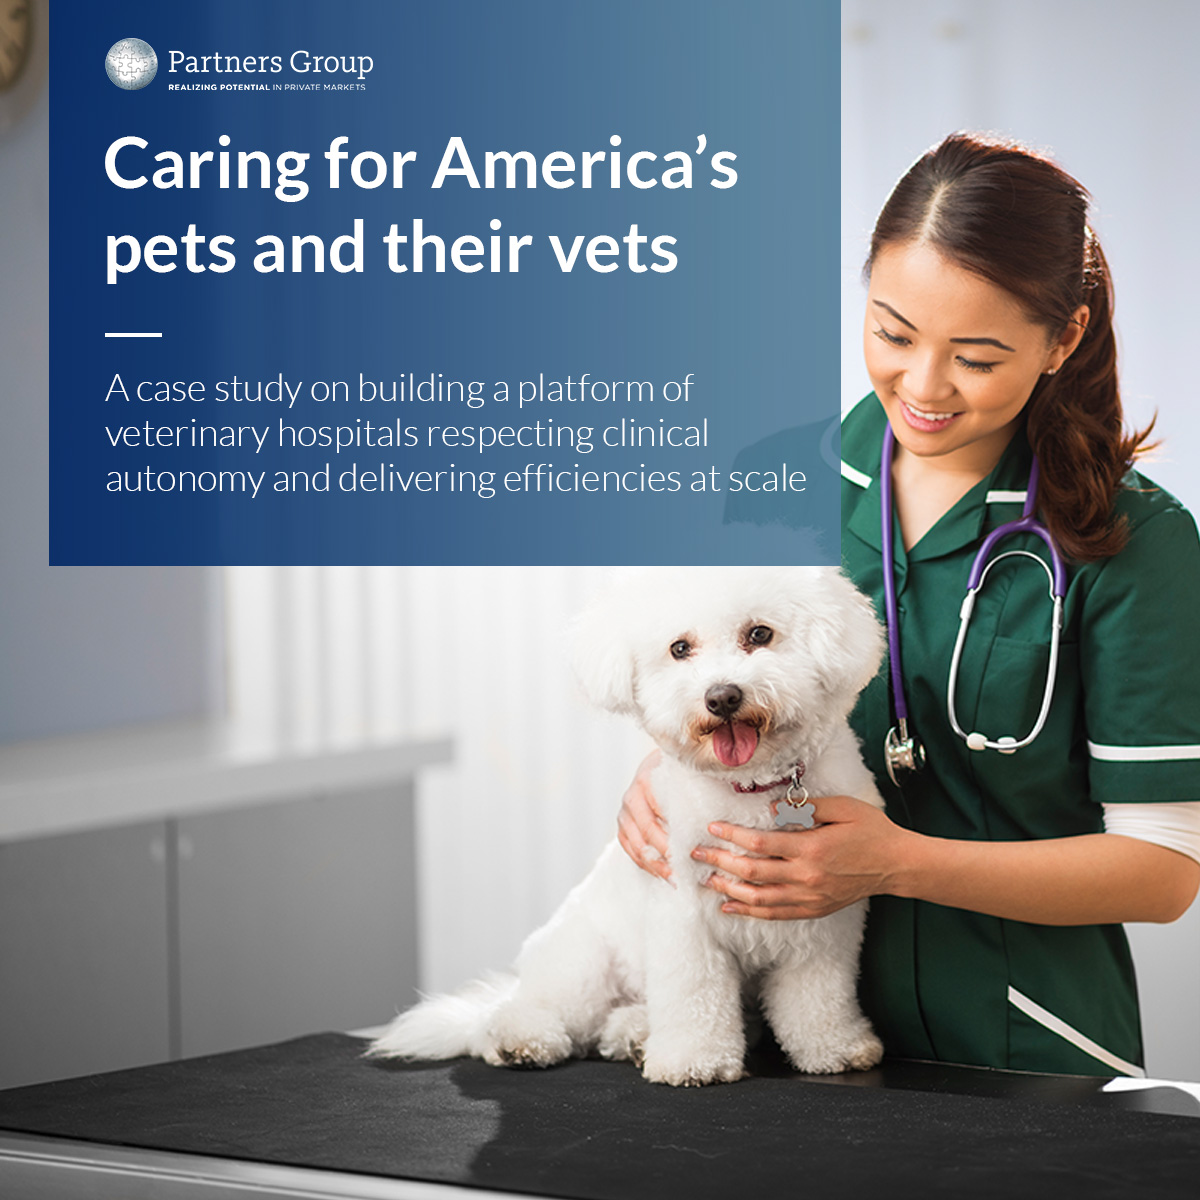 Read our case study on Blue River PetCare to see how we built a platform of veterinary hospitals while respecting clinical autonomy and delivering efficiencies at scale. partnersgroup.com/fileadmin/user…